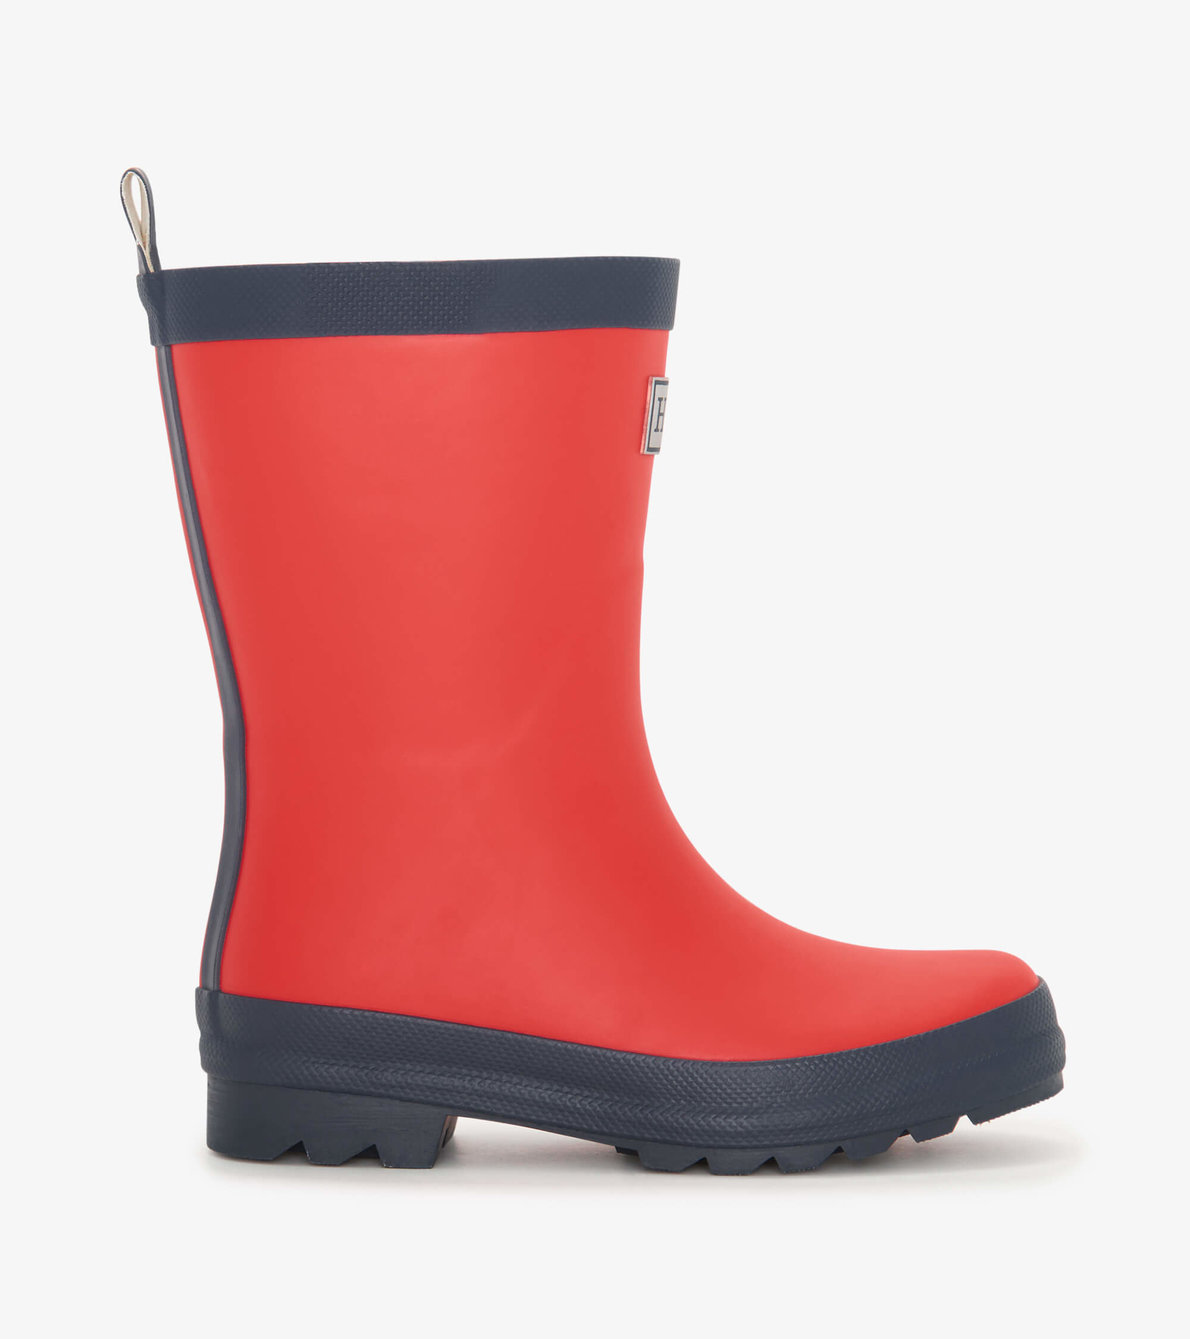 View larger image of Kids Red & Navy Matte Wellies